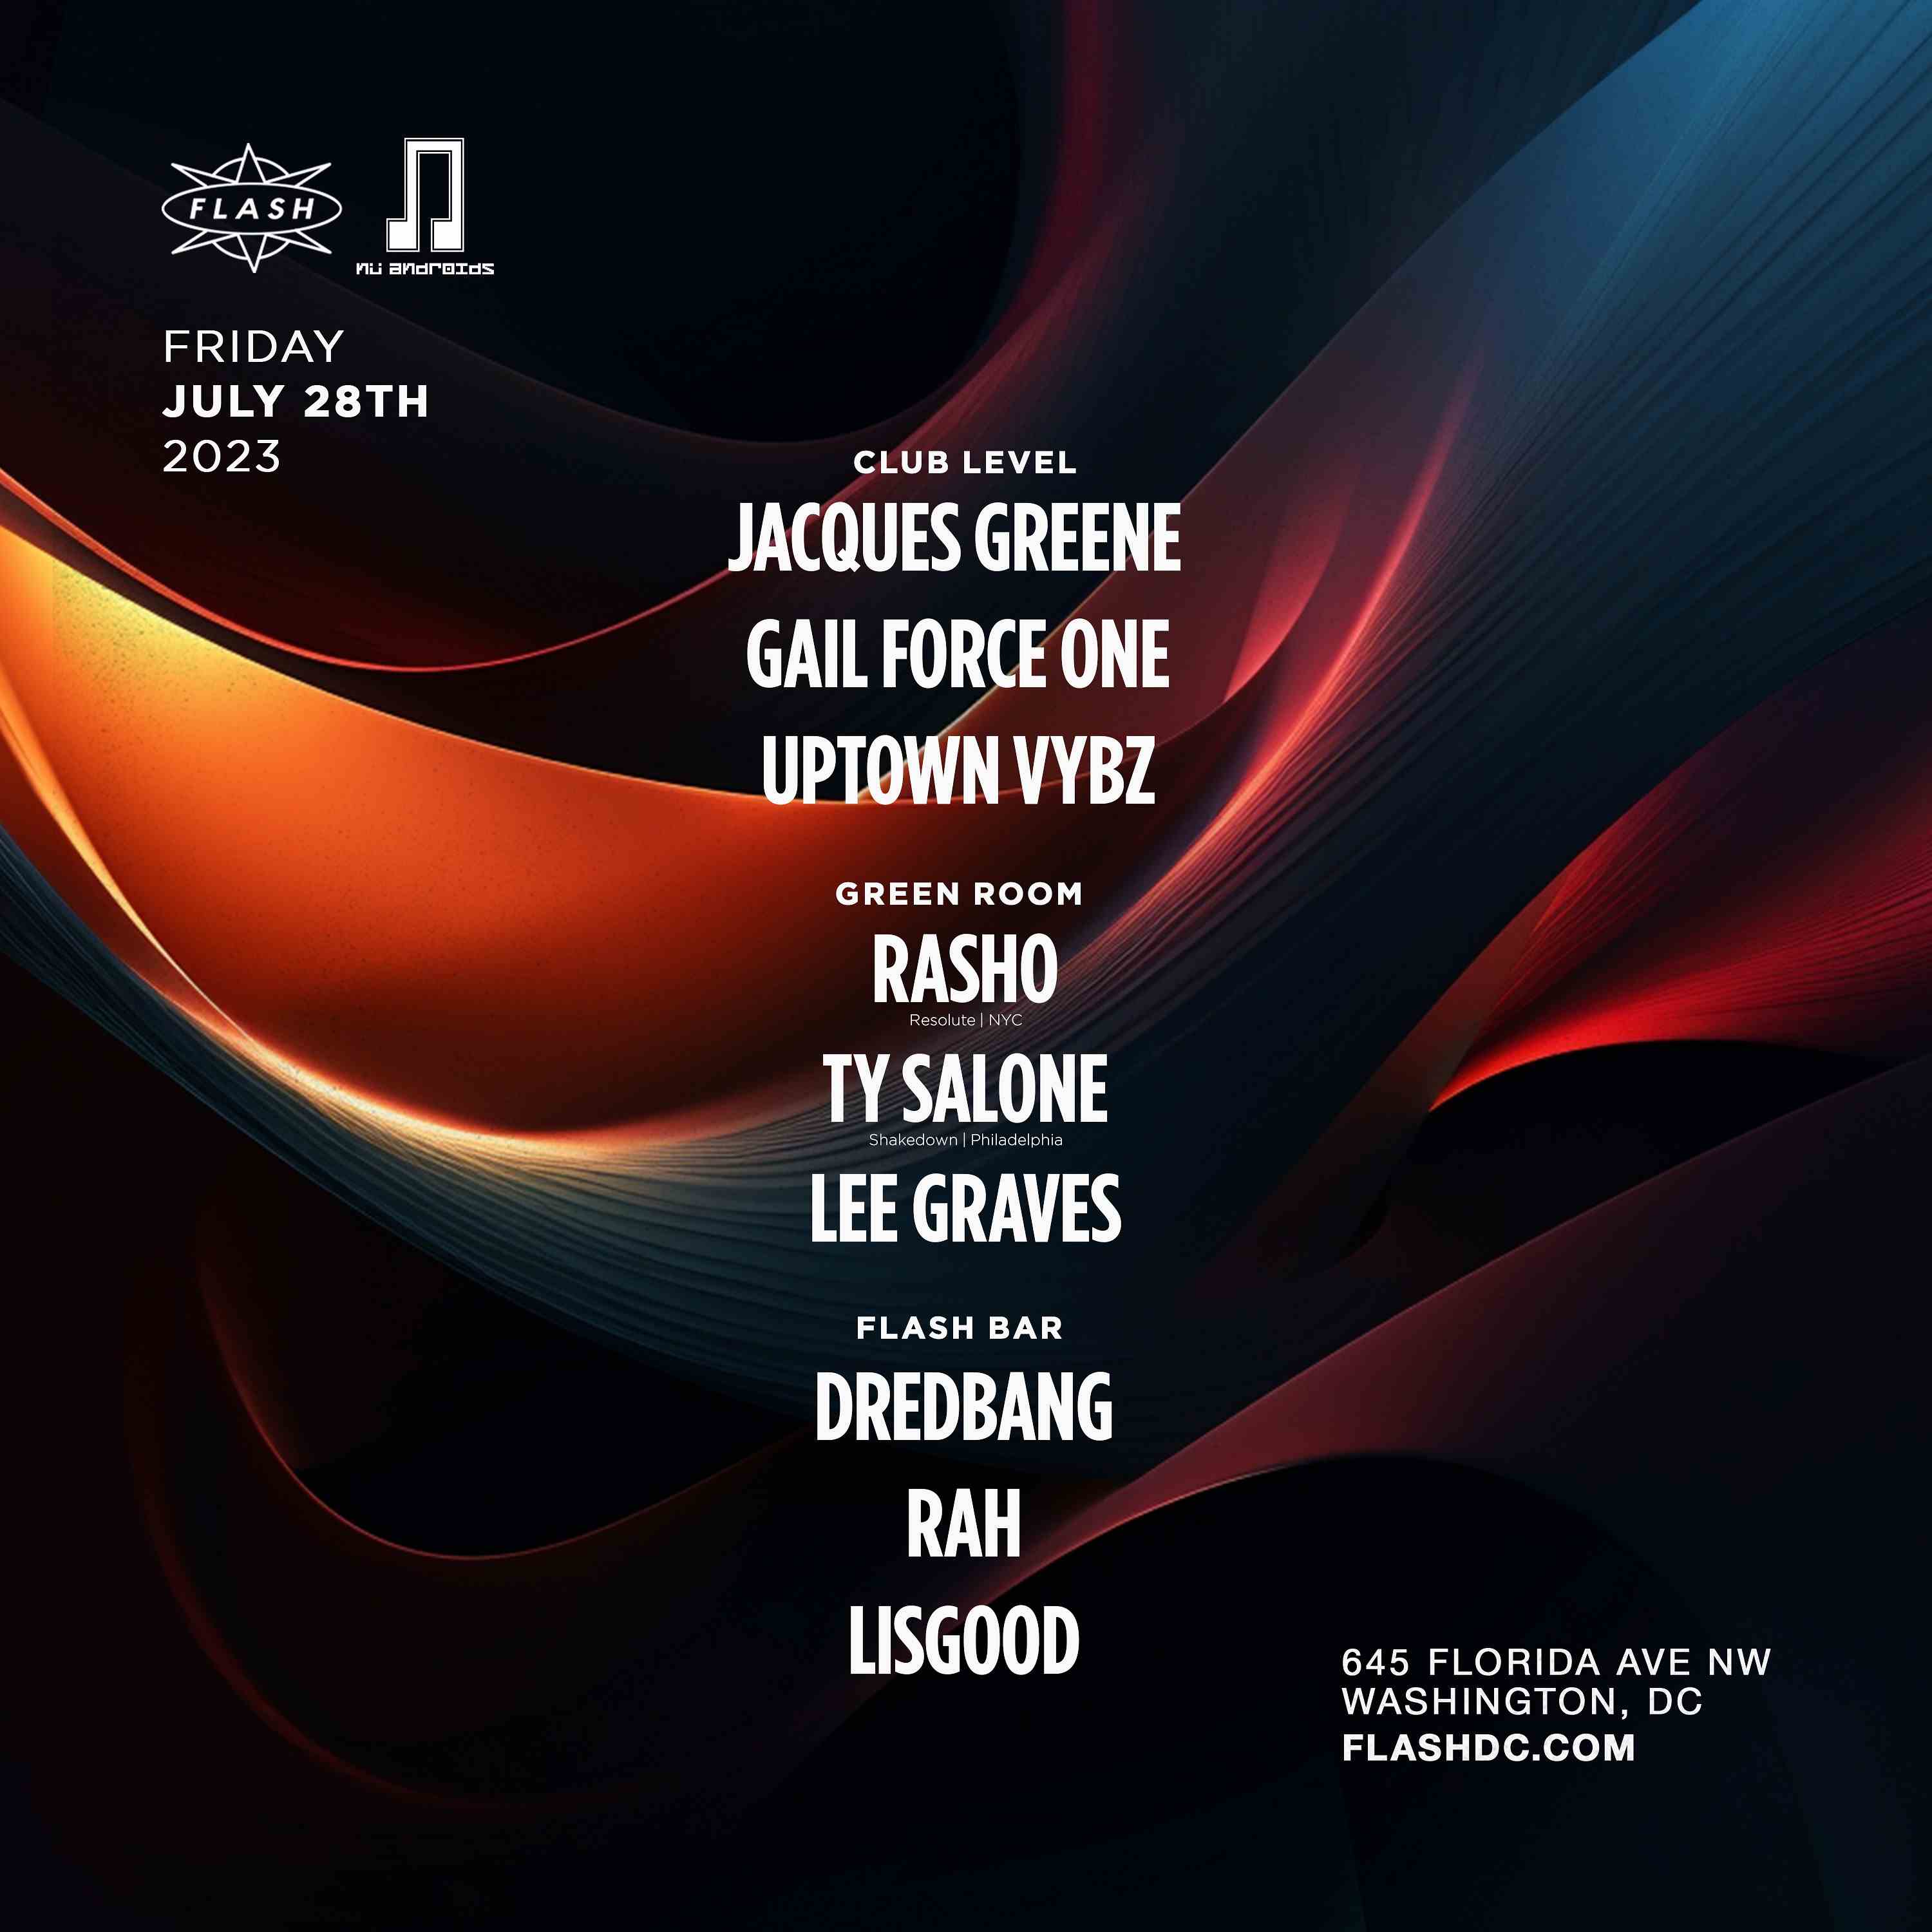 Flash & NuAndroids Presents: Jacques Greene event flyer